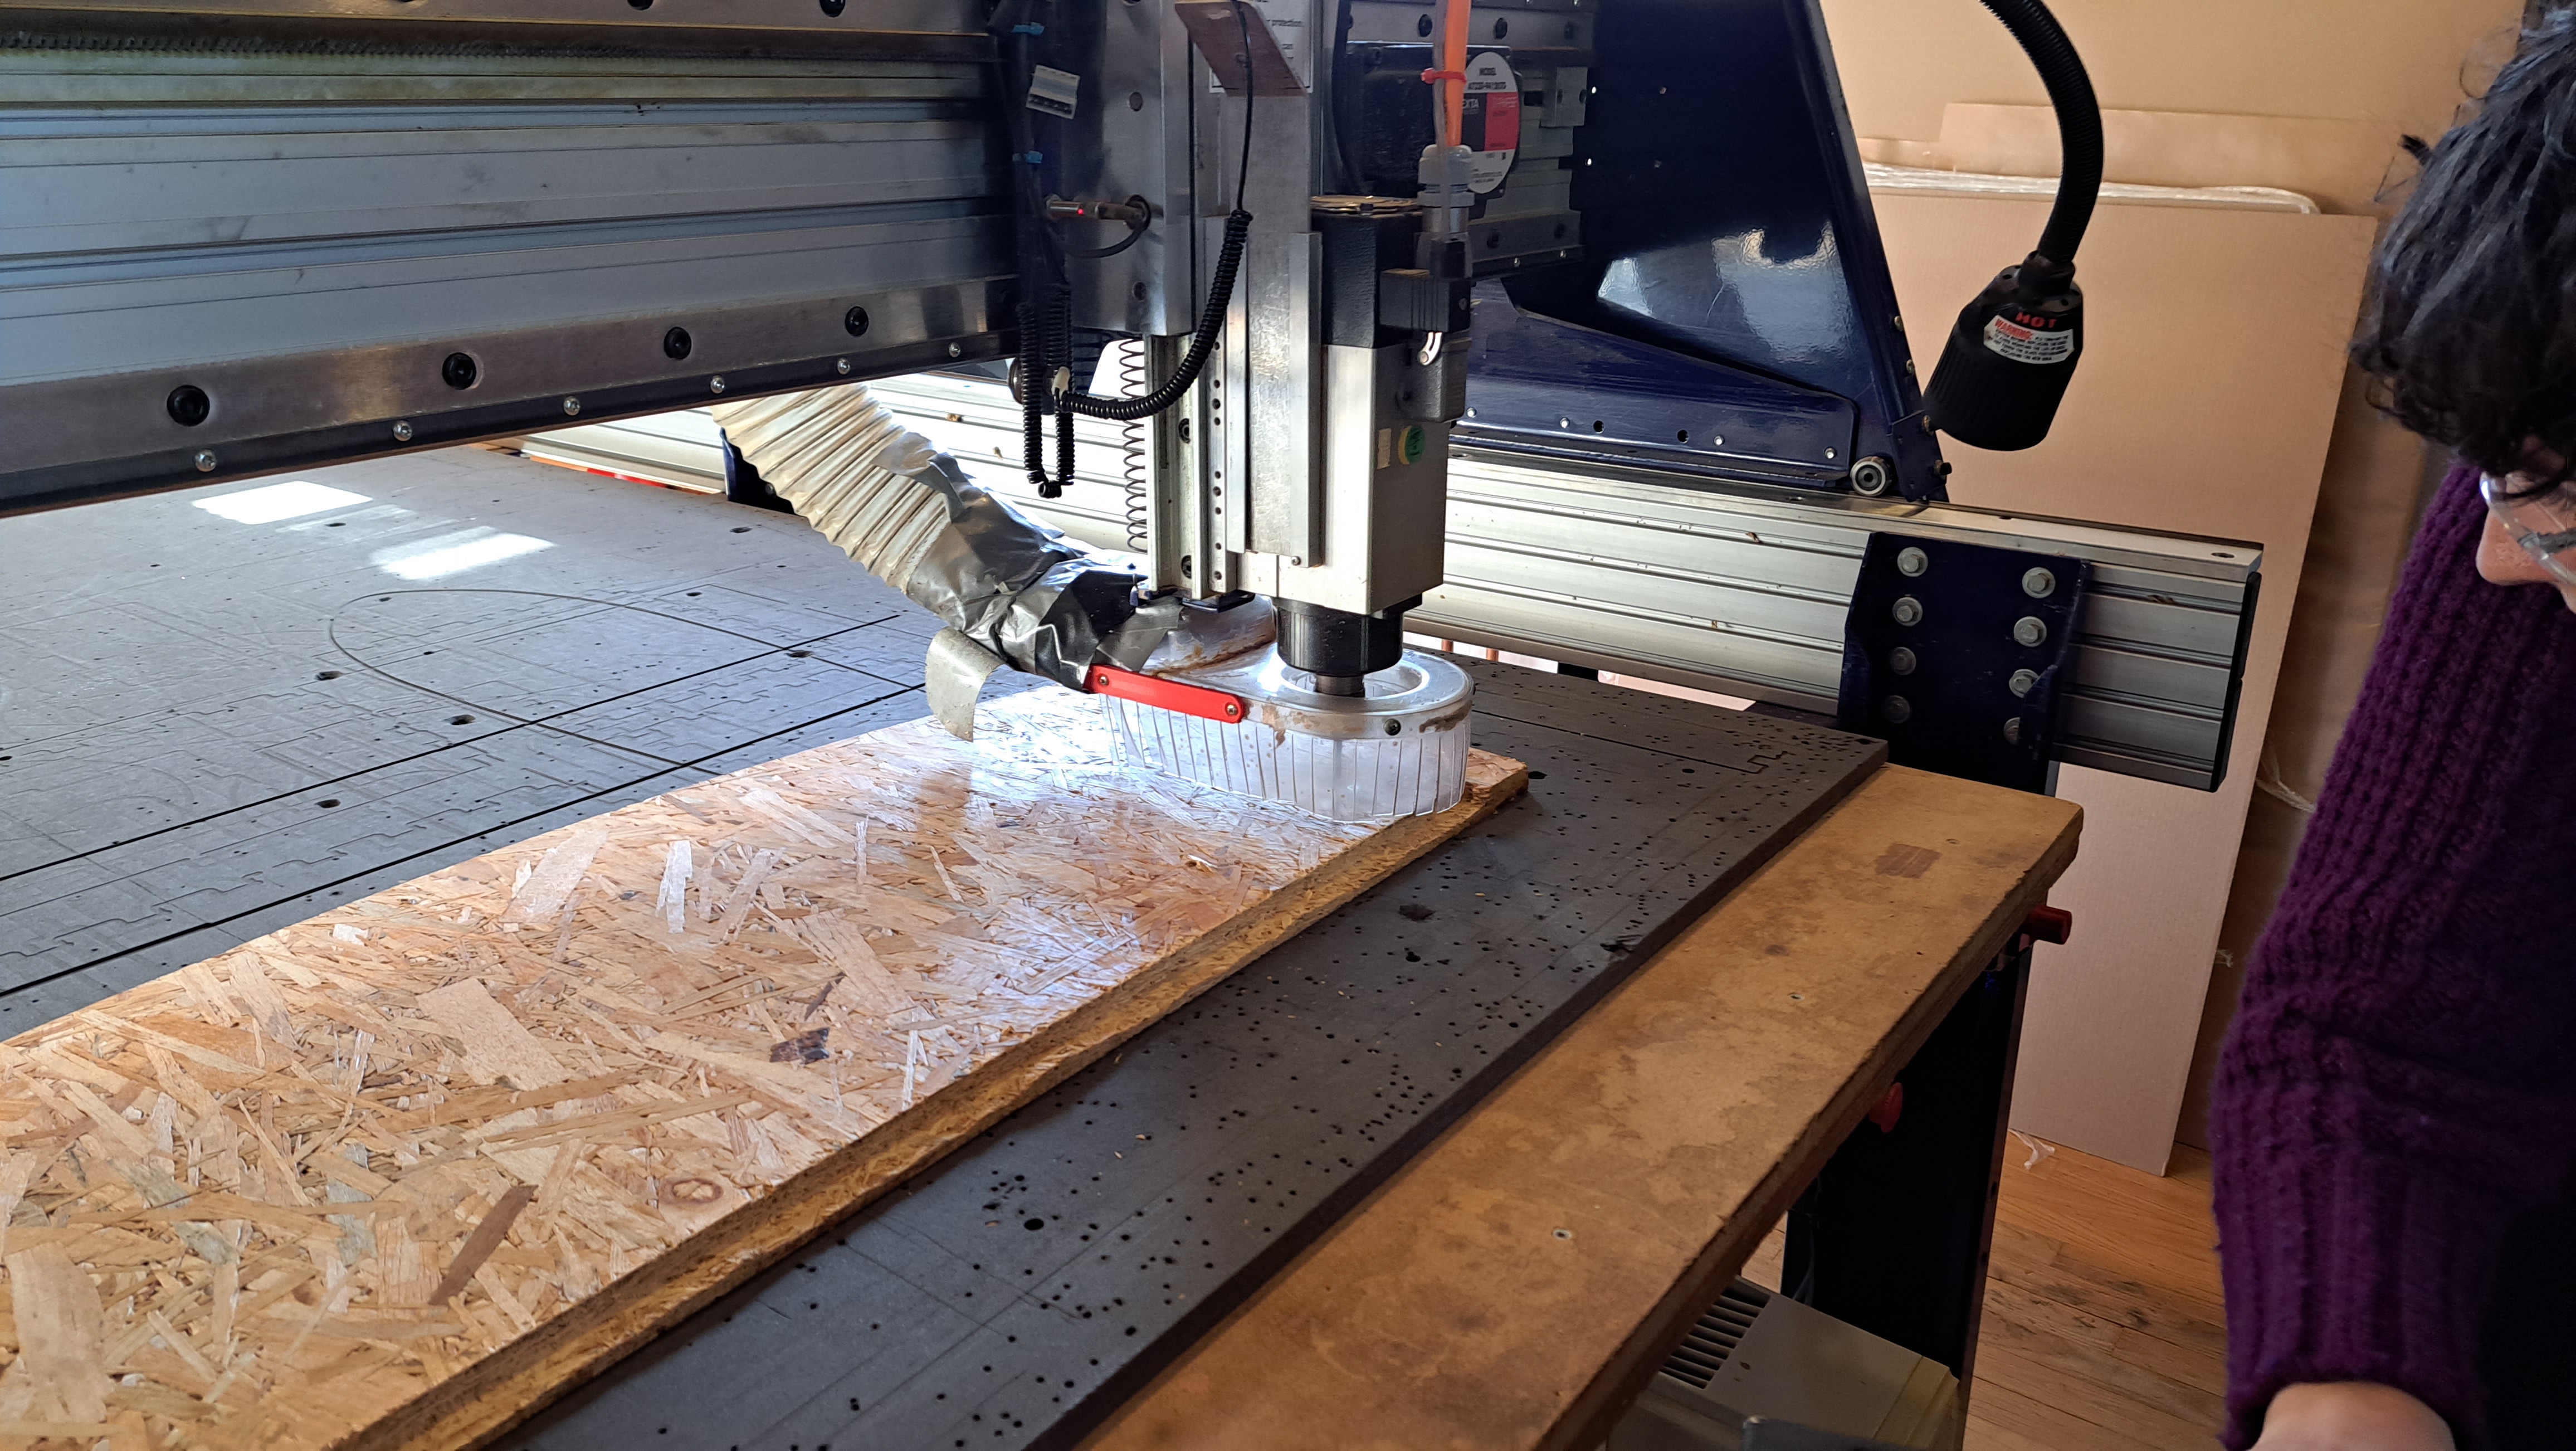 cnc milling in process